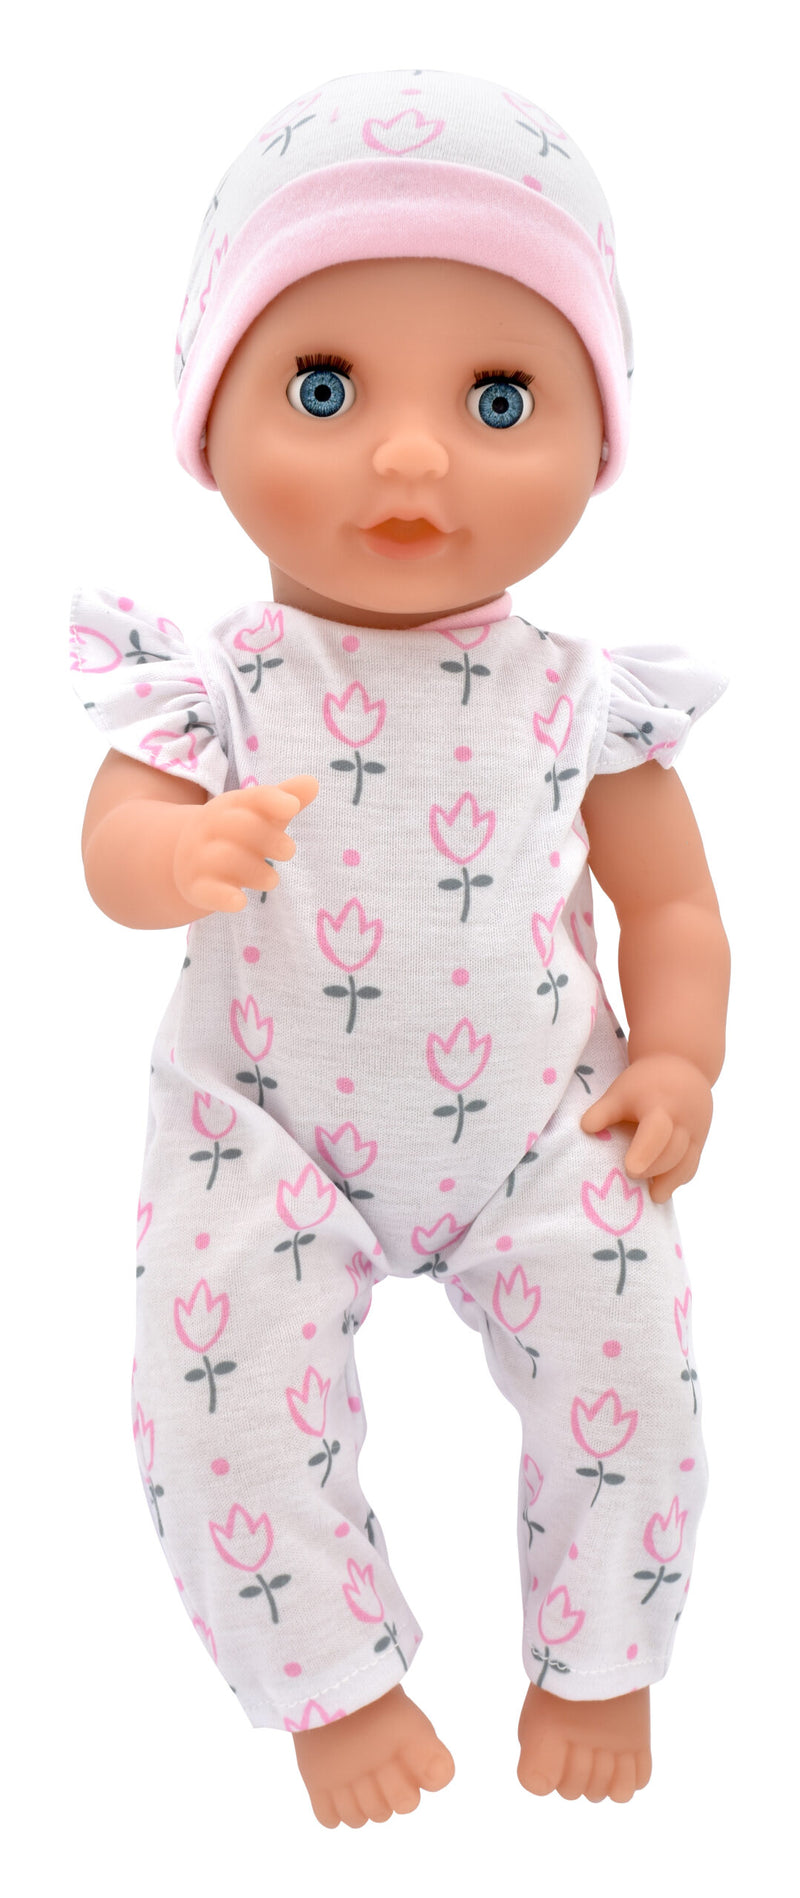 Dolllsworld Baby Tinkles Drink and Wet  Doll 38cm (15") with Accessories (7769841598619)